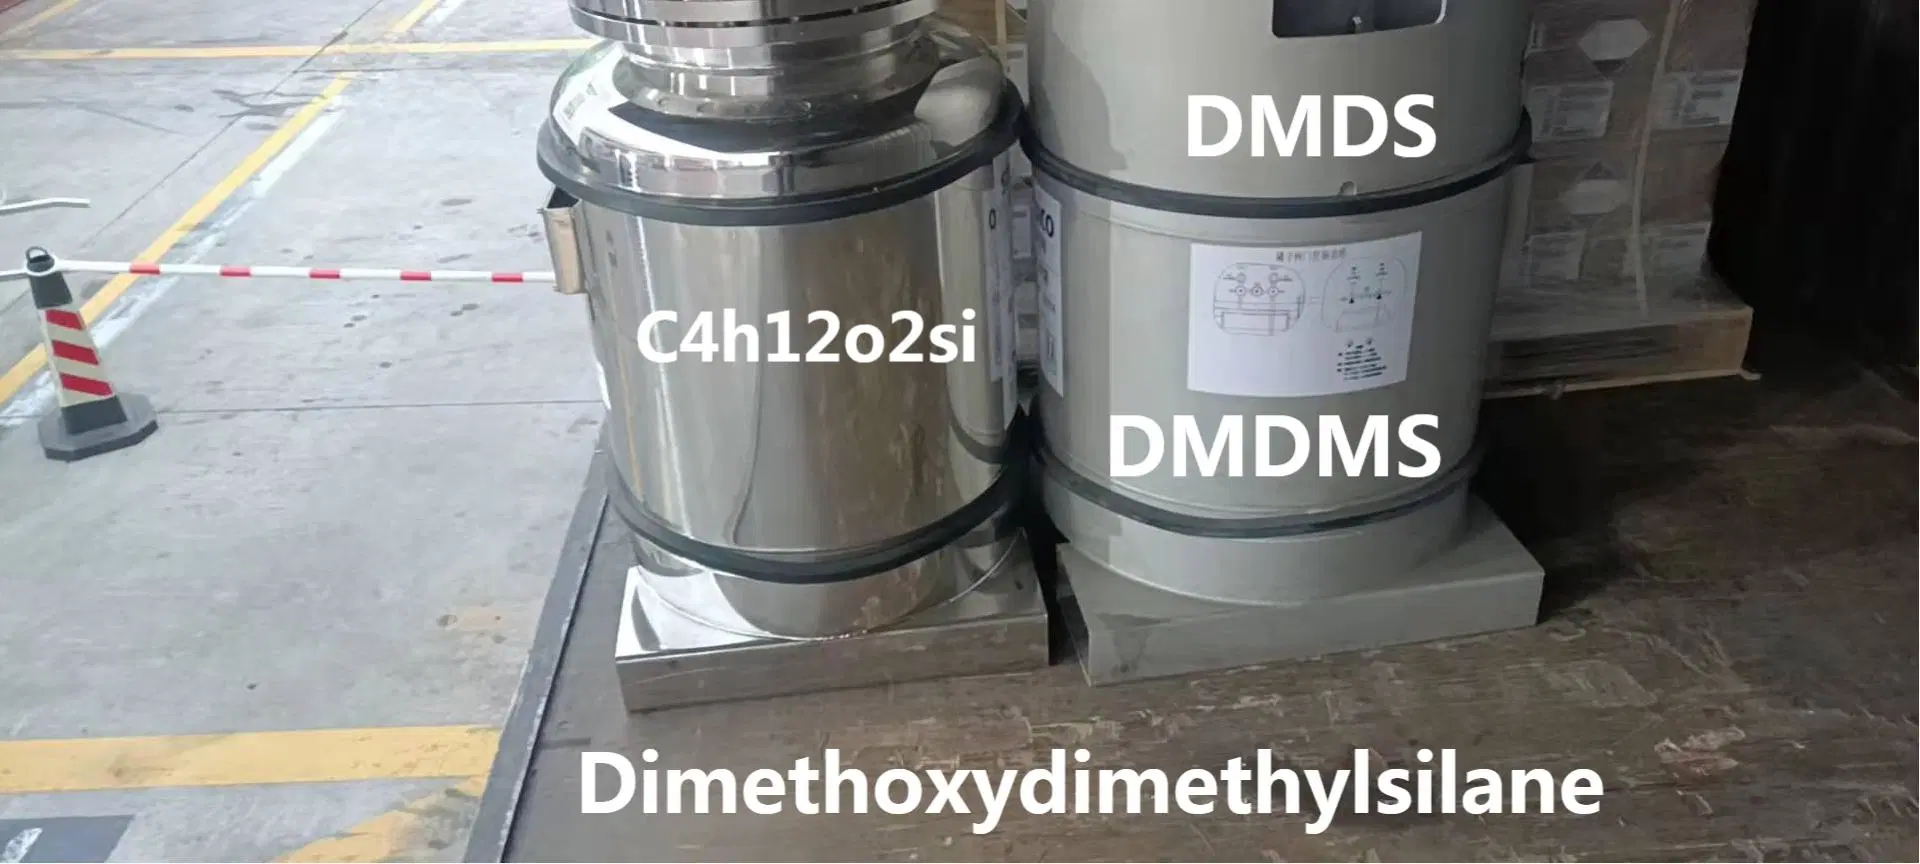 C4h12o2si Used in The Electronics Industry for Manufacturing Semiconductors Dimethoxydimethylsilane Dmds